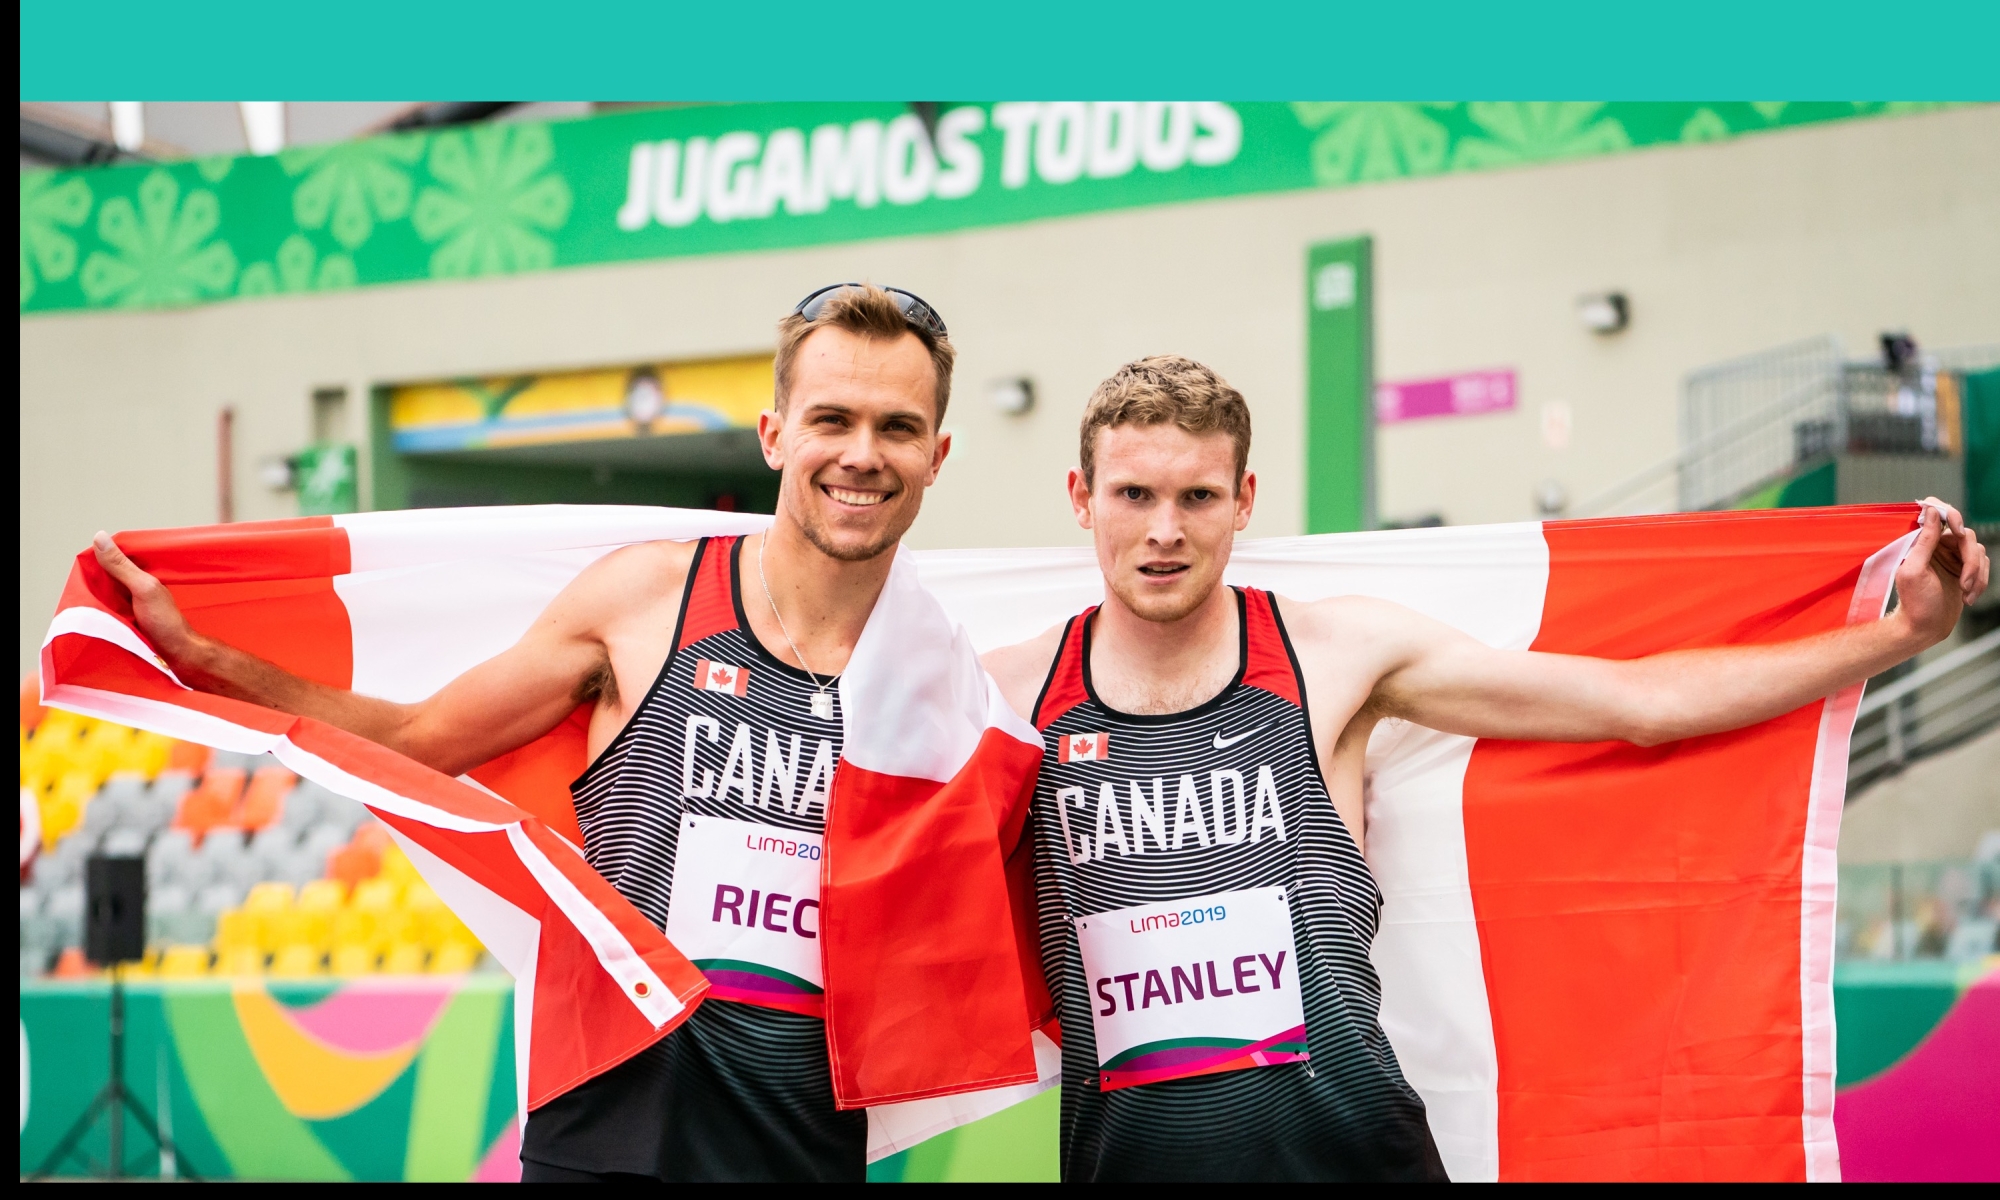 nate and liam holding the canadian flag